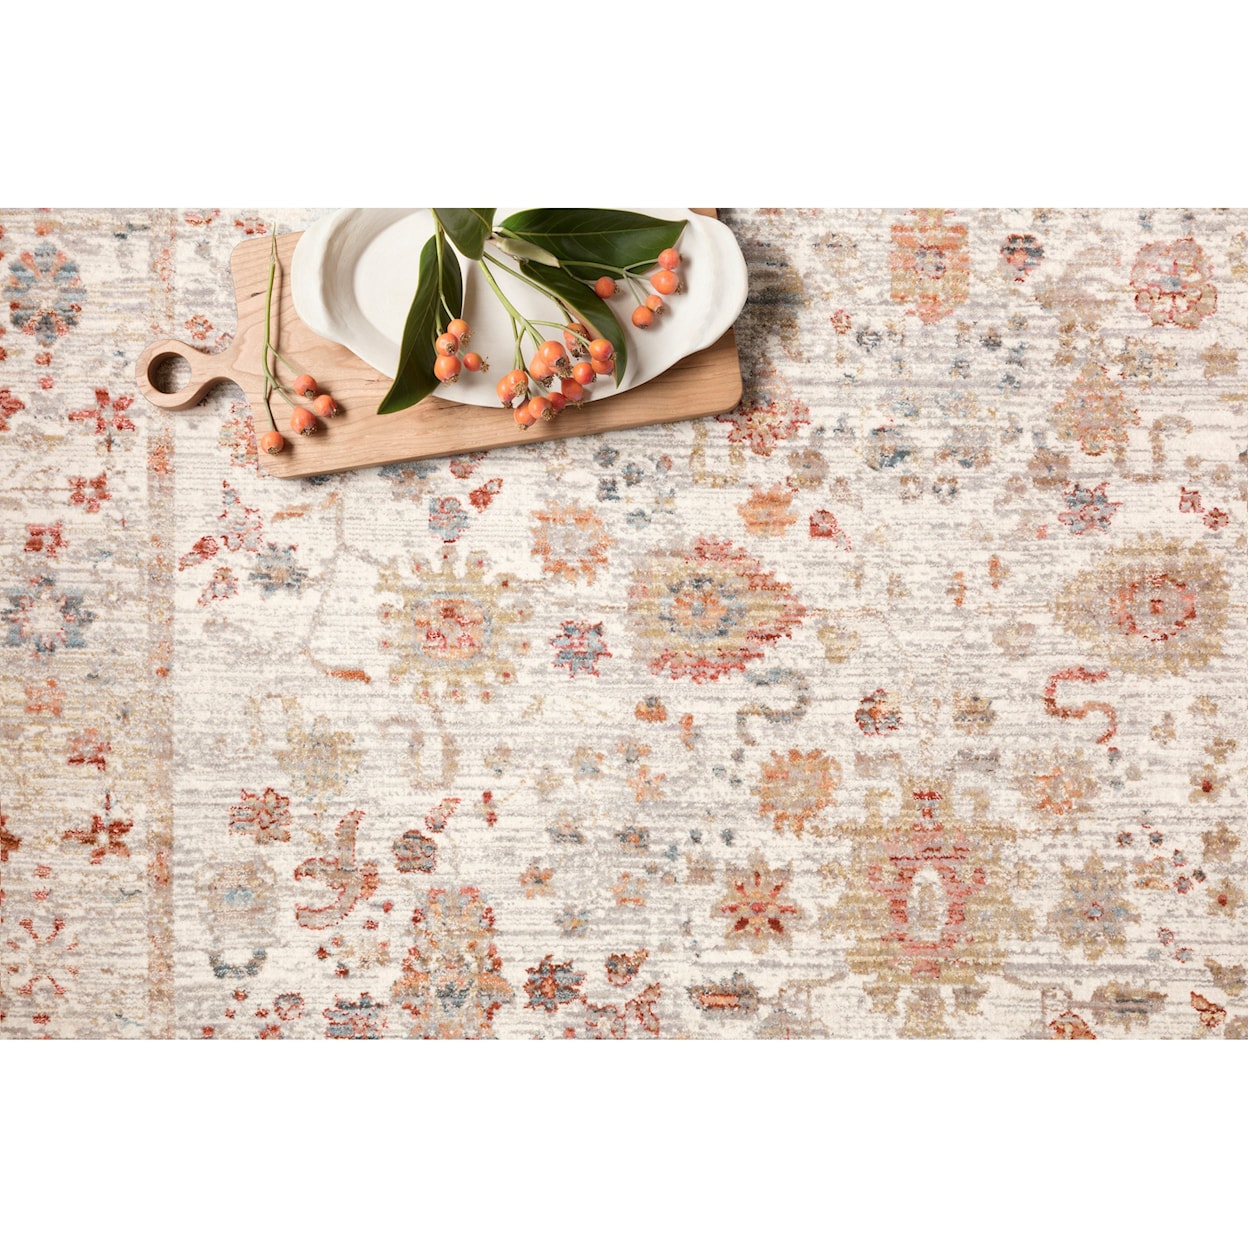 Reeds Rugs Claire 9'6" x 13' Ivory / Multi Rug